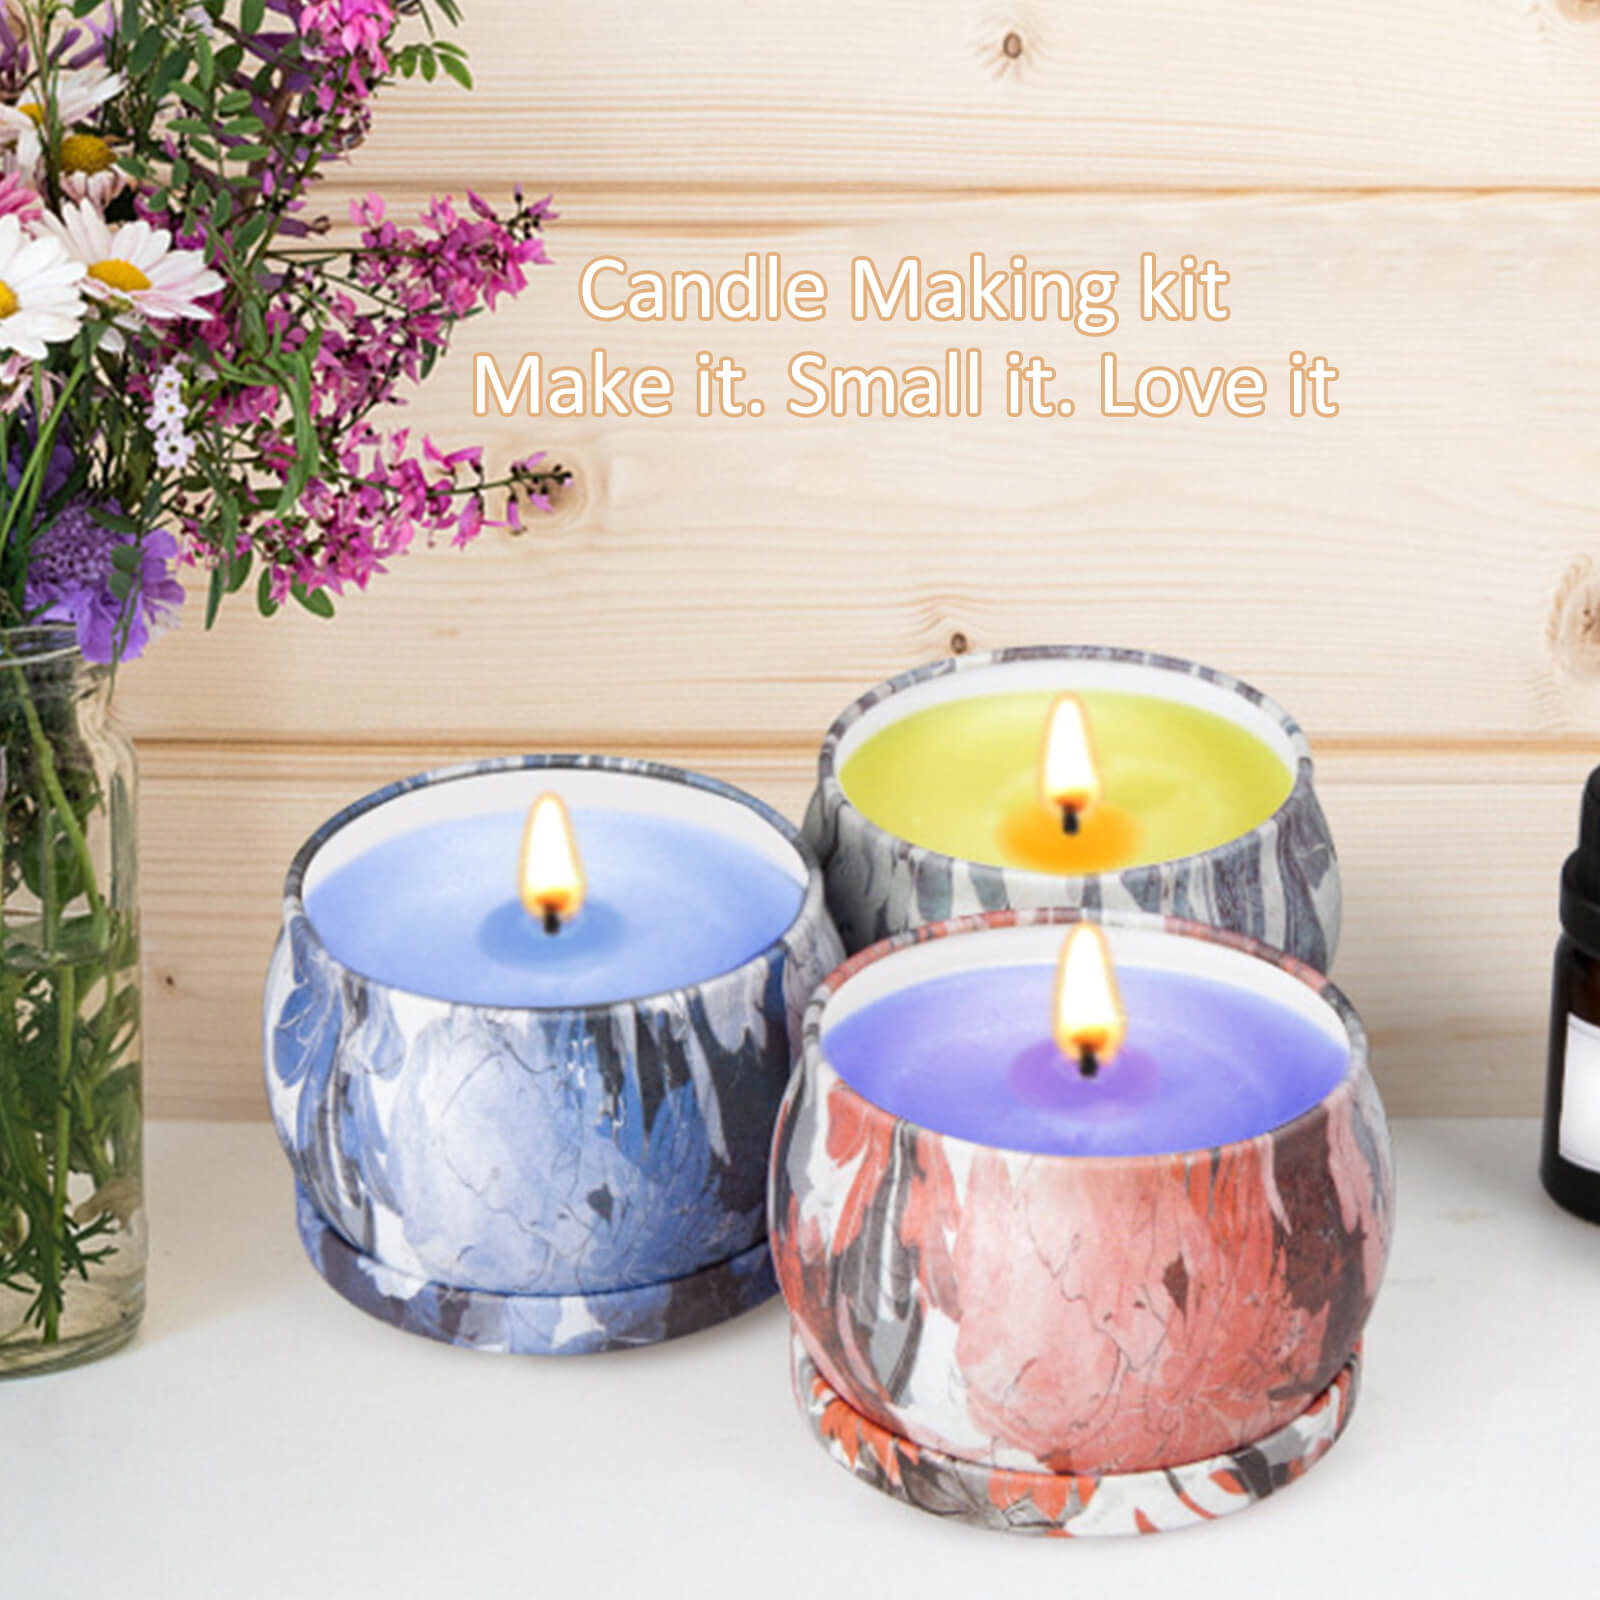 Candle Making Kit with 6 Different Fragrance Oil, Wax, Cotton Wicks, Metal Pot, Candle Dyes, Candle Tins and More for Candle DIY